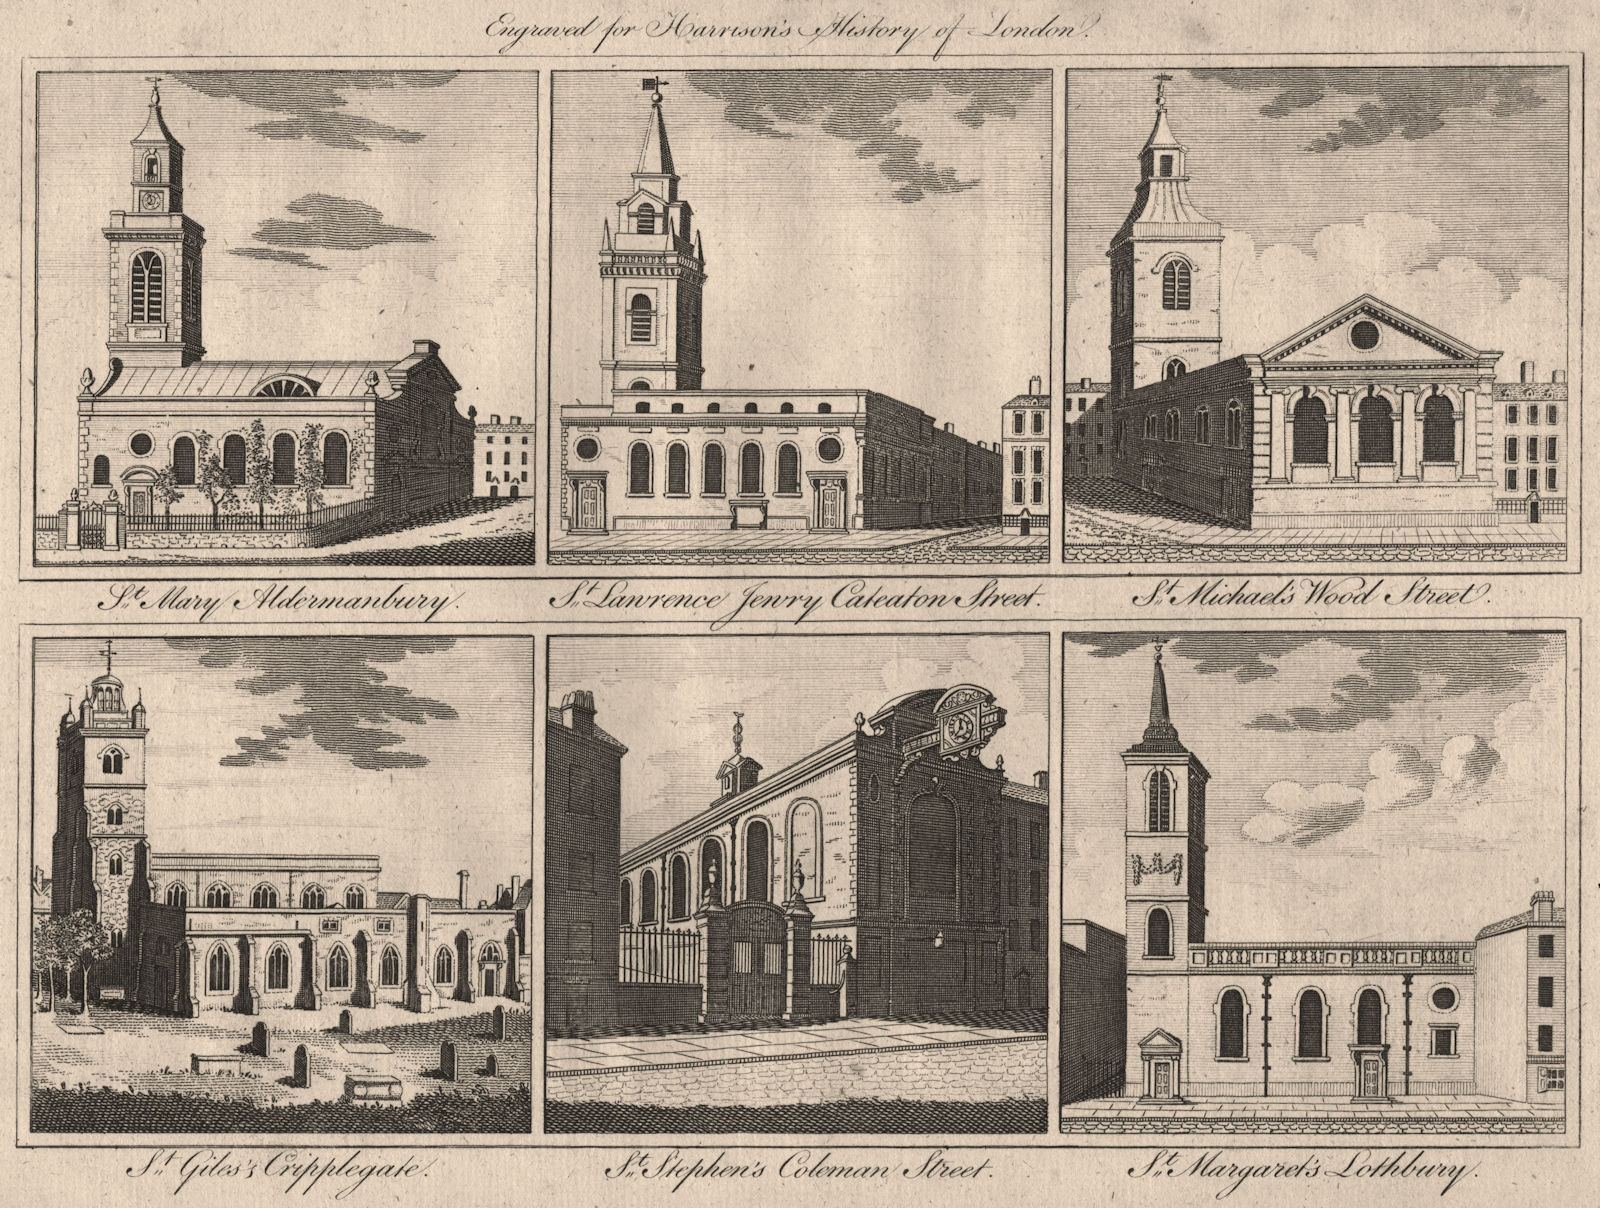 Associate Product WREN CHURCHES St Mary Lawrence Jewry Michael Stephen Margaret Lothbury 1776